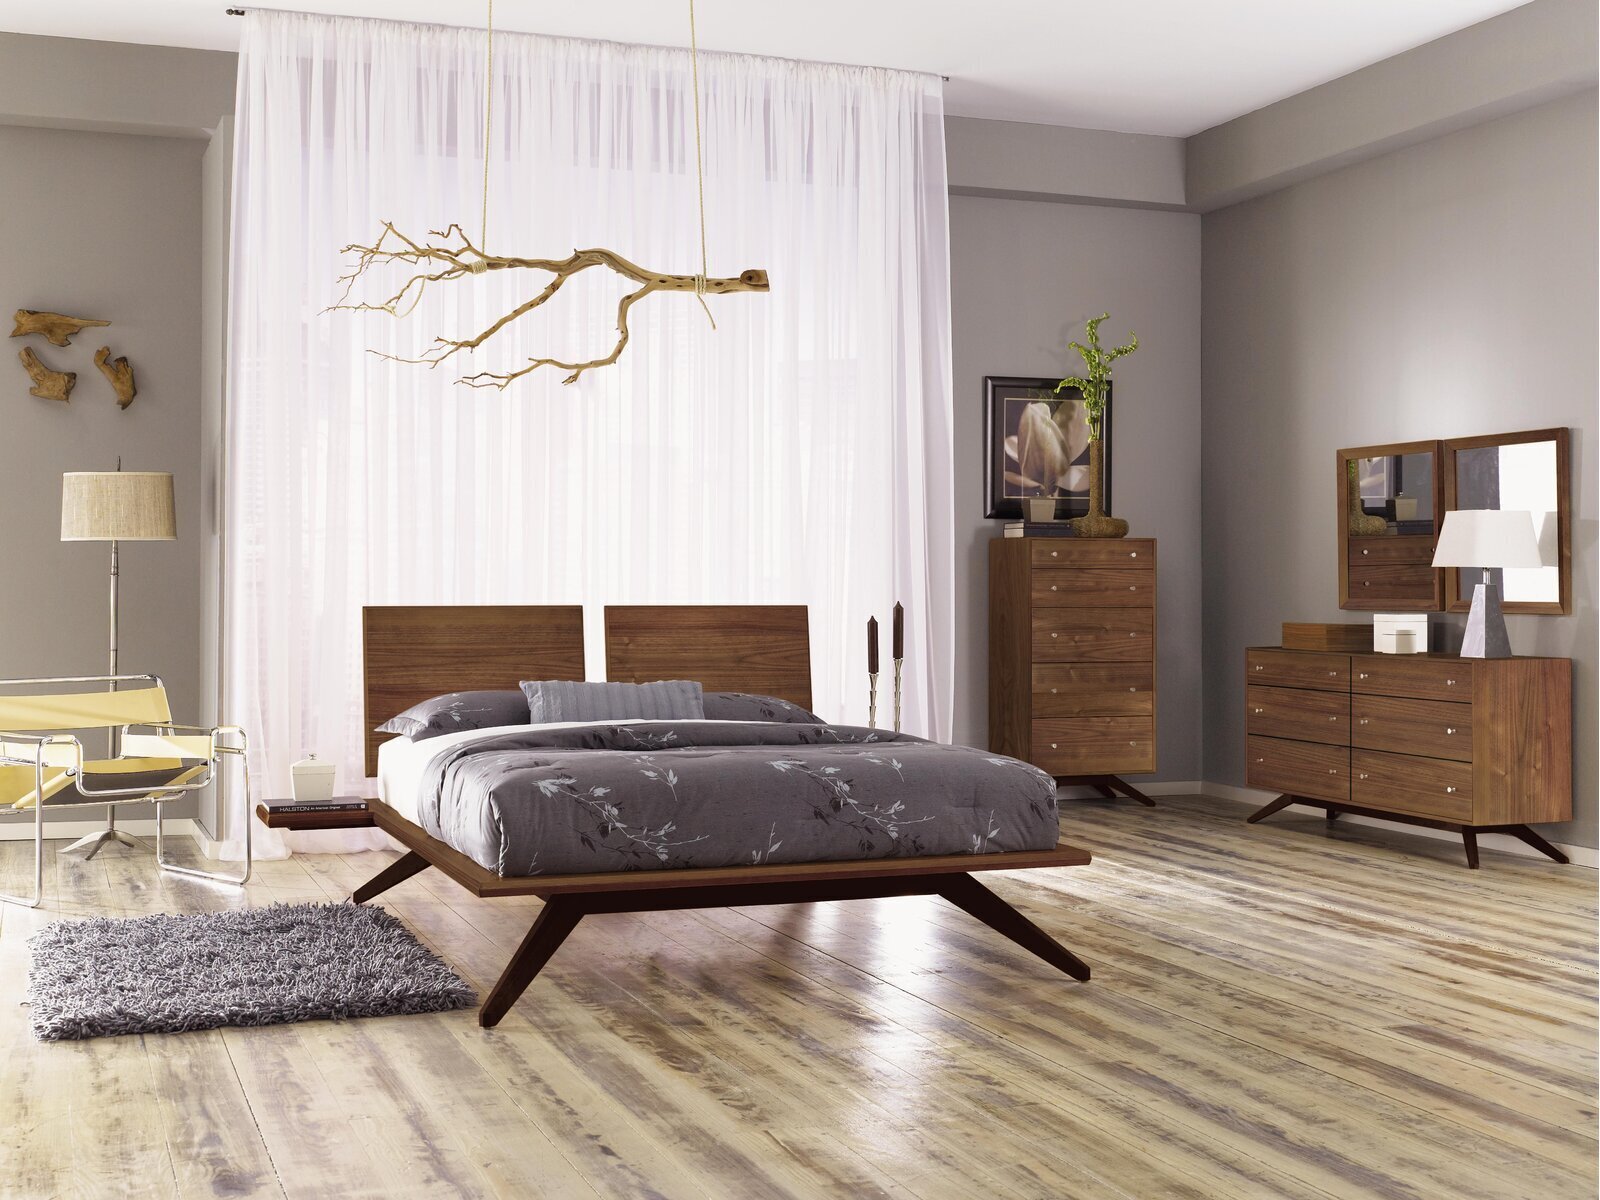 Cherry bedroom set with several color options